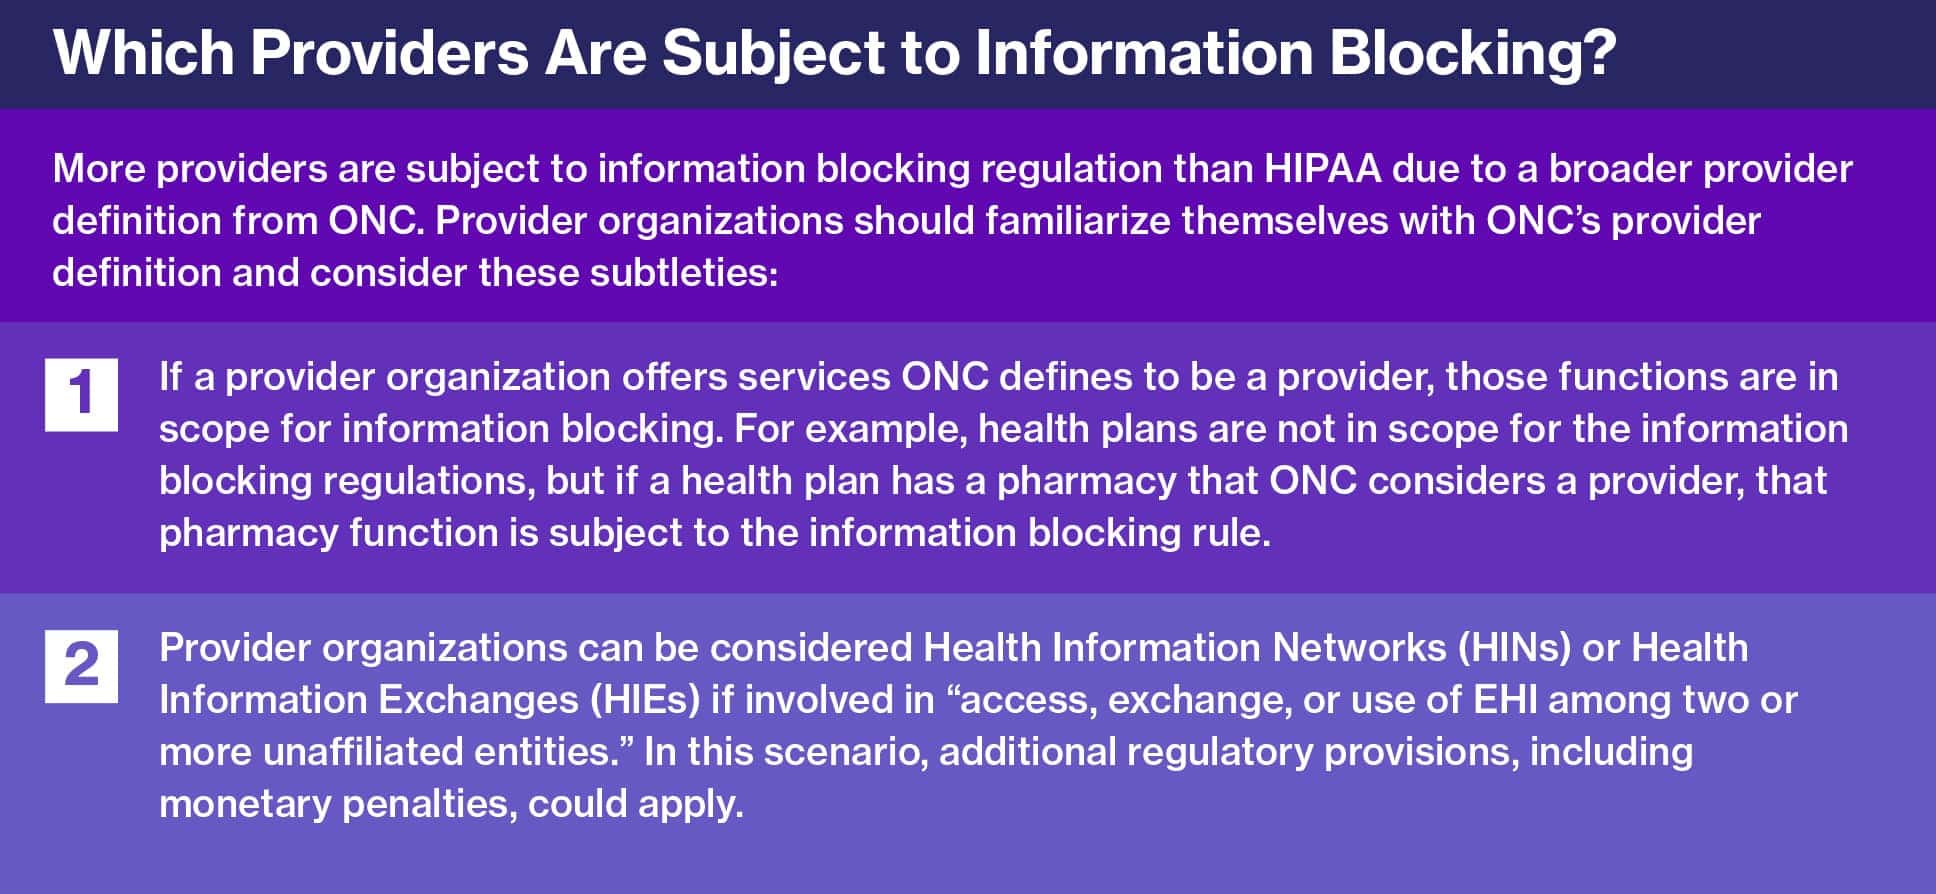 Which Providers are Subject to Information Blocking?